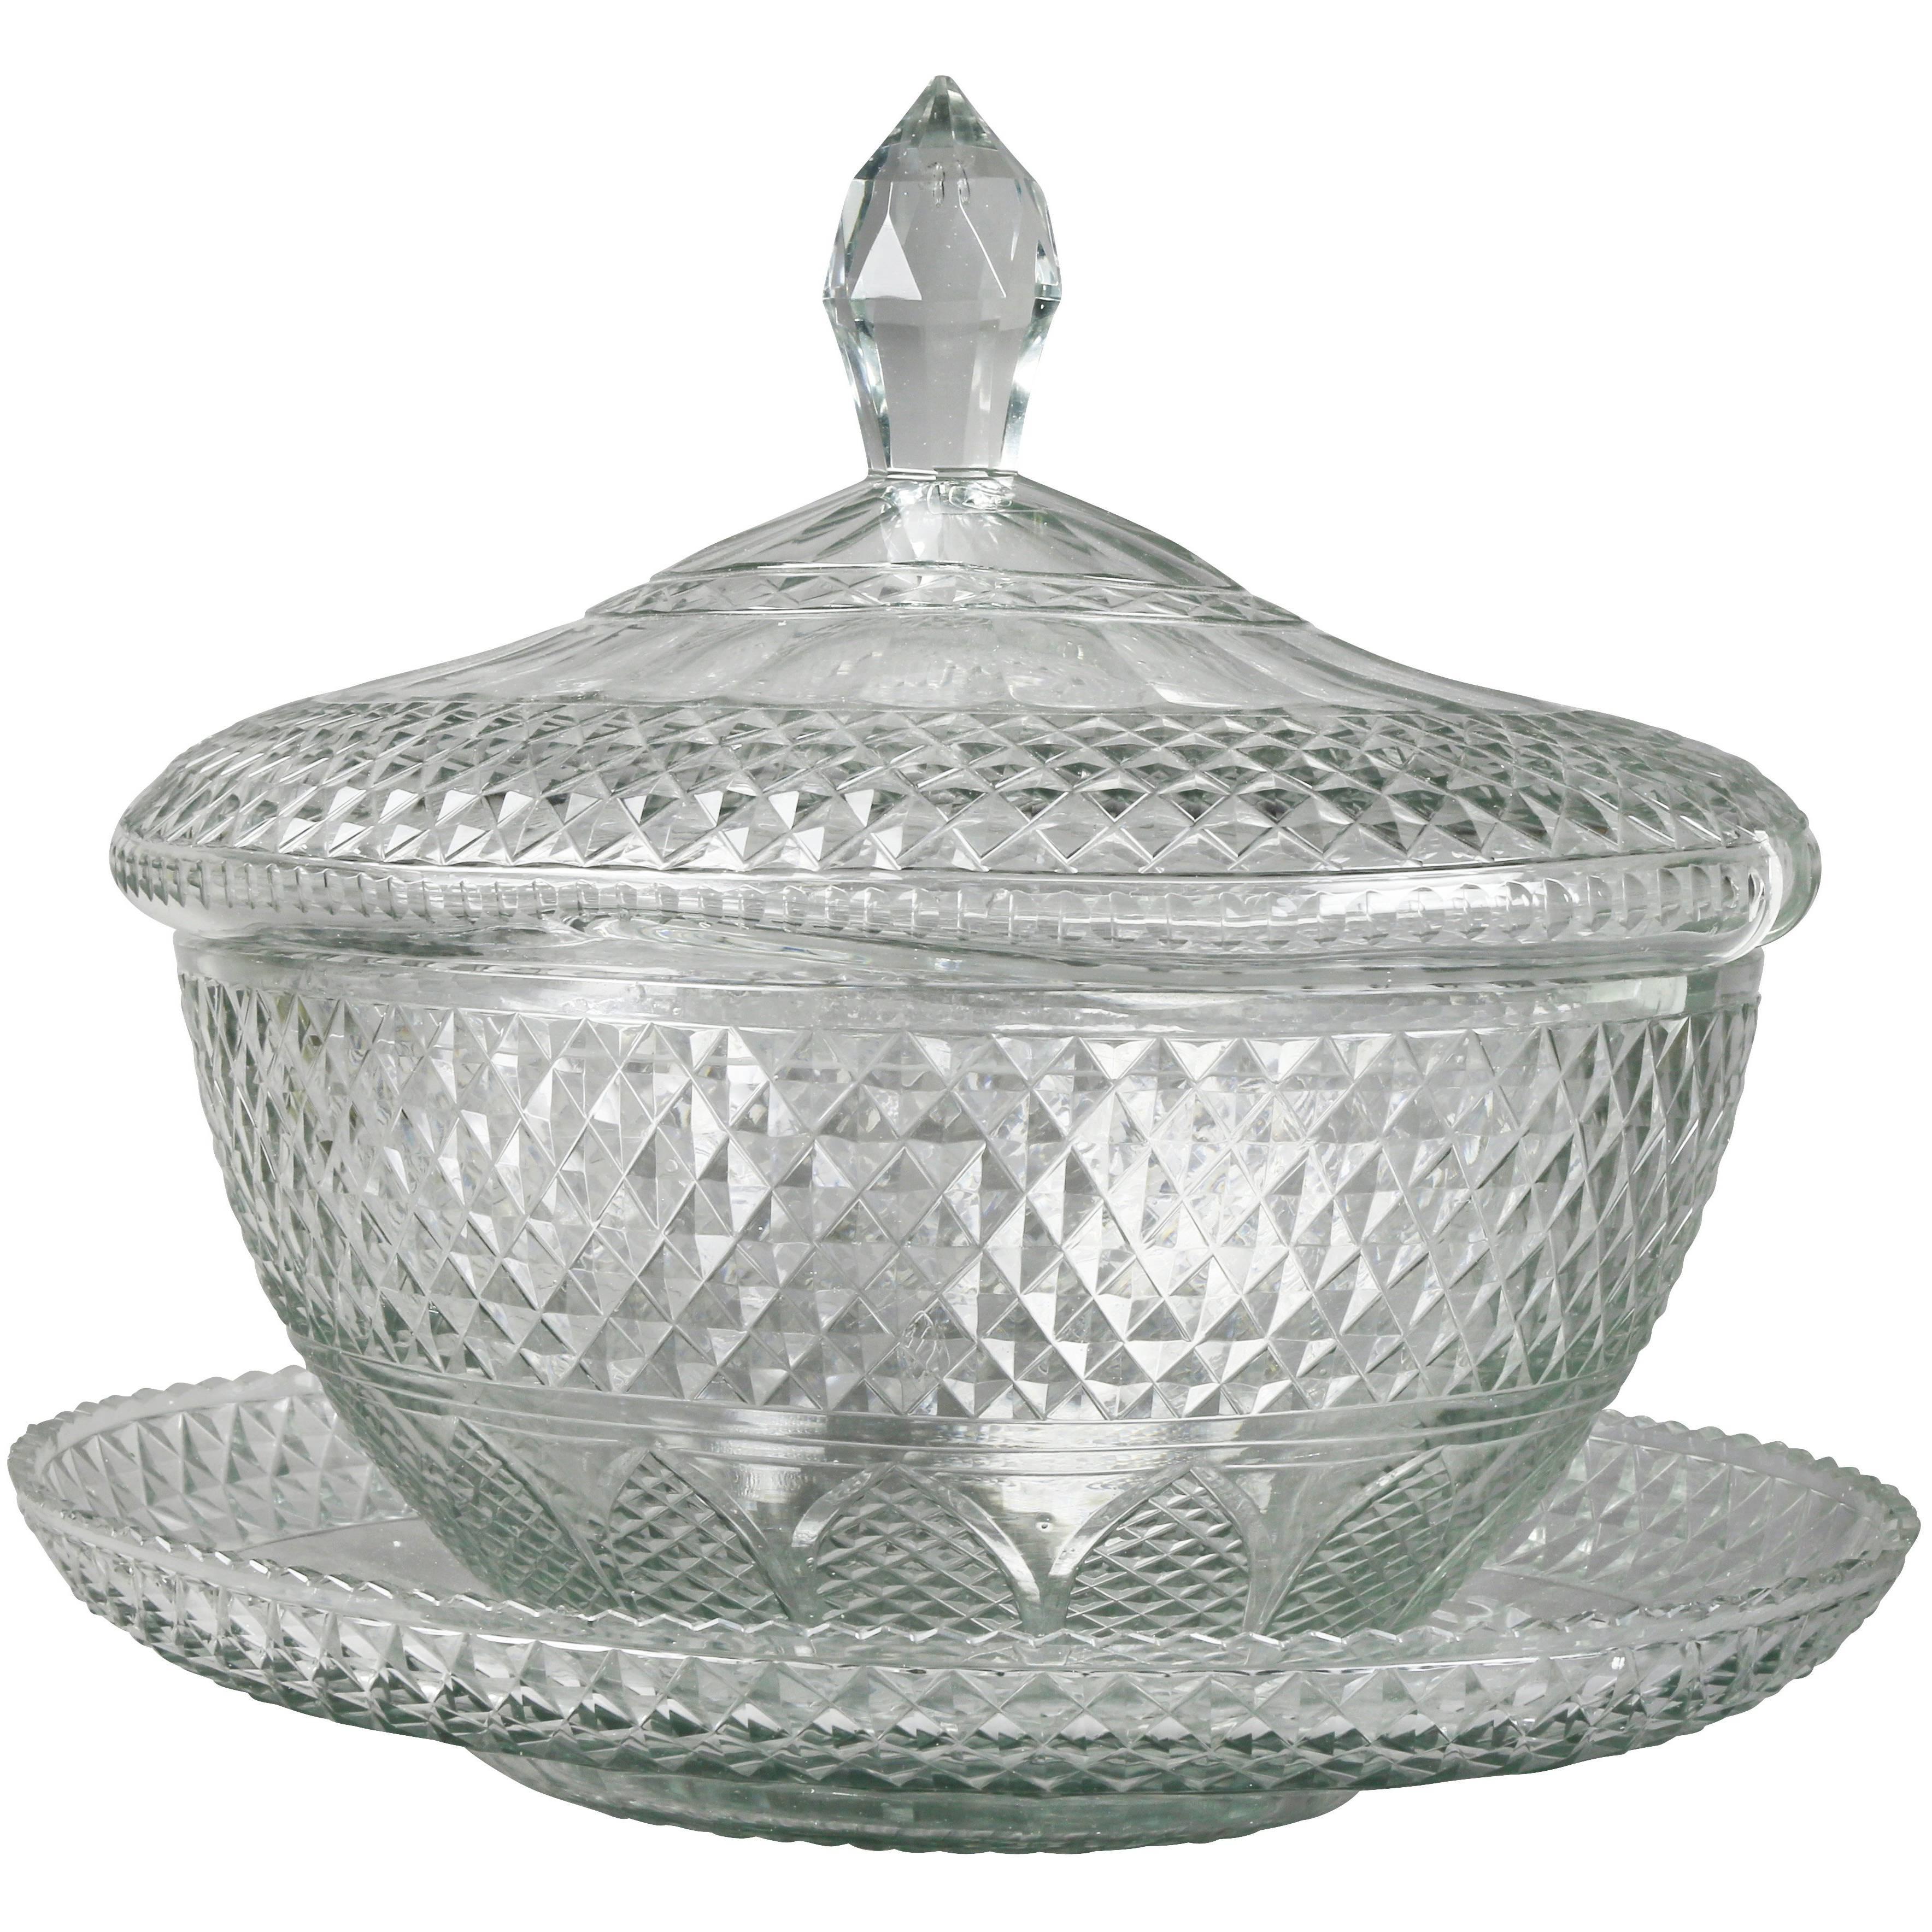 Anglo Irish Cut-Glass Covered Tureen and Underplate